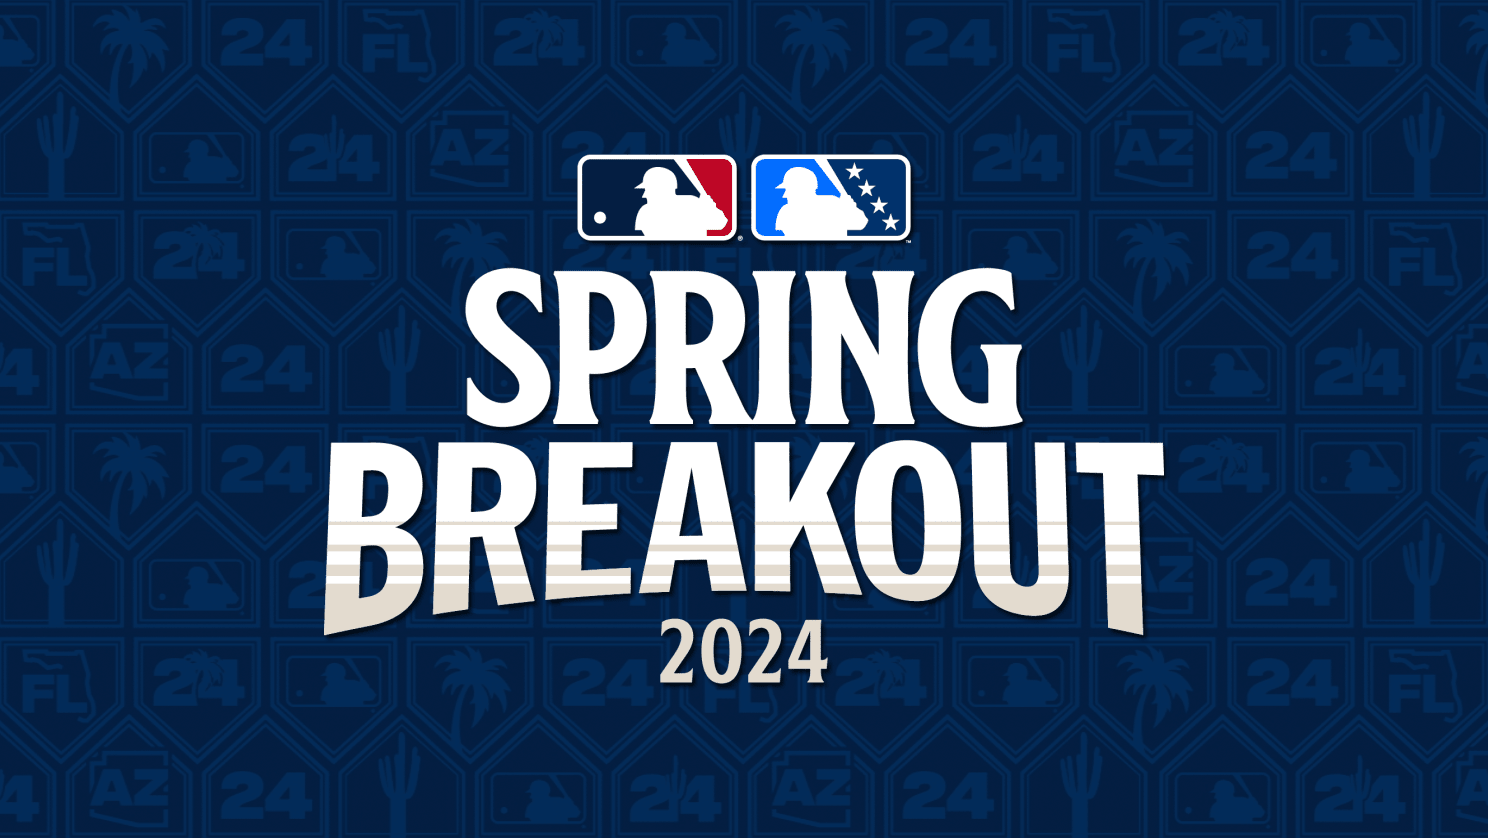 Spring Breakout on MLB Network